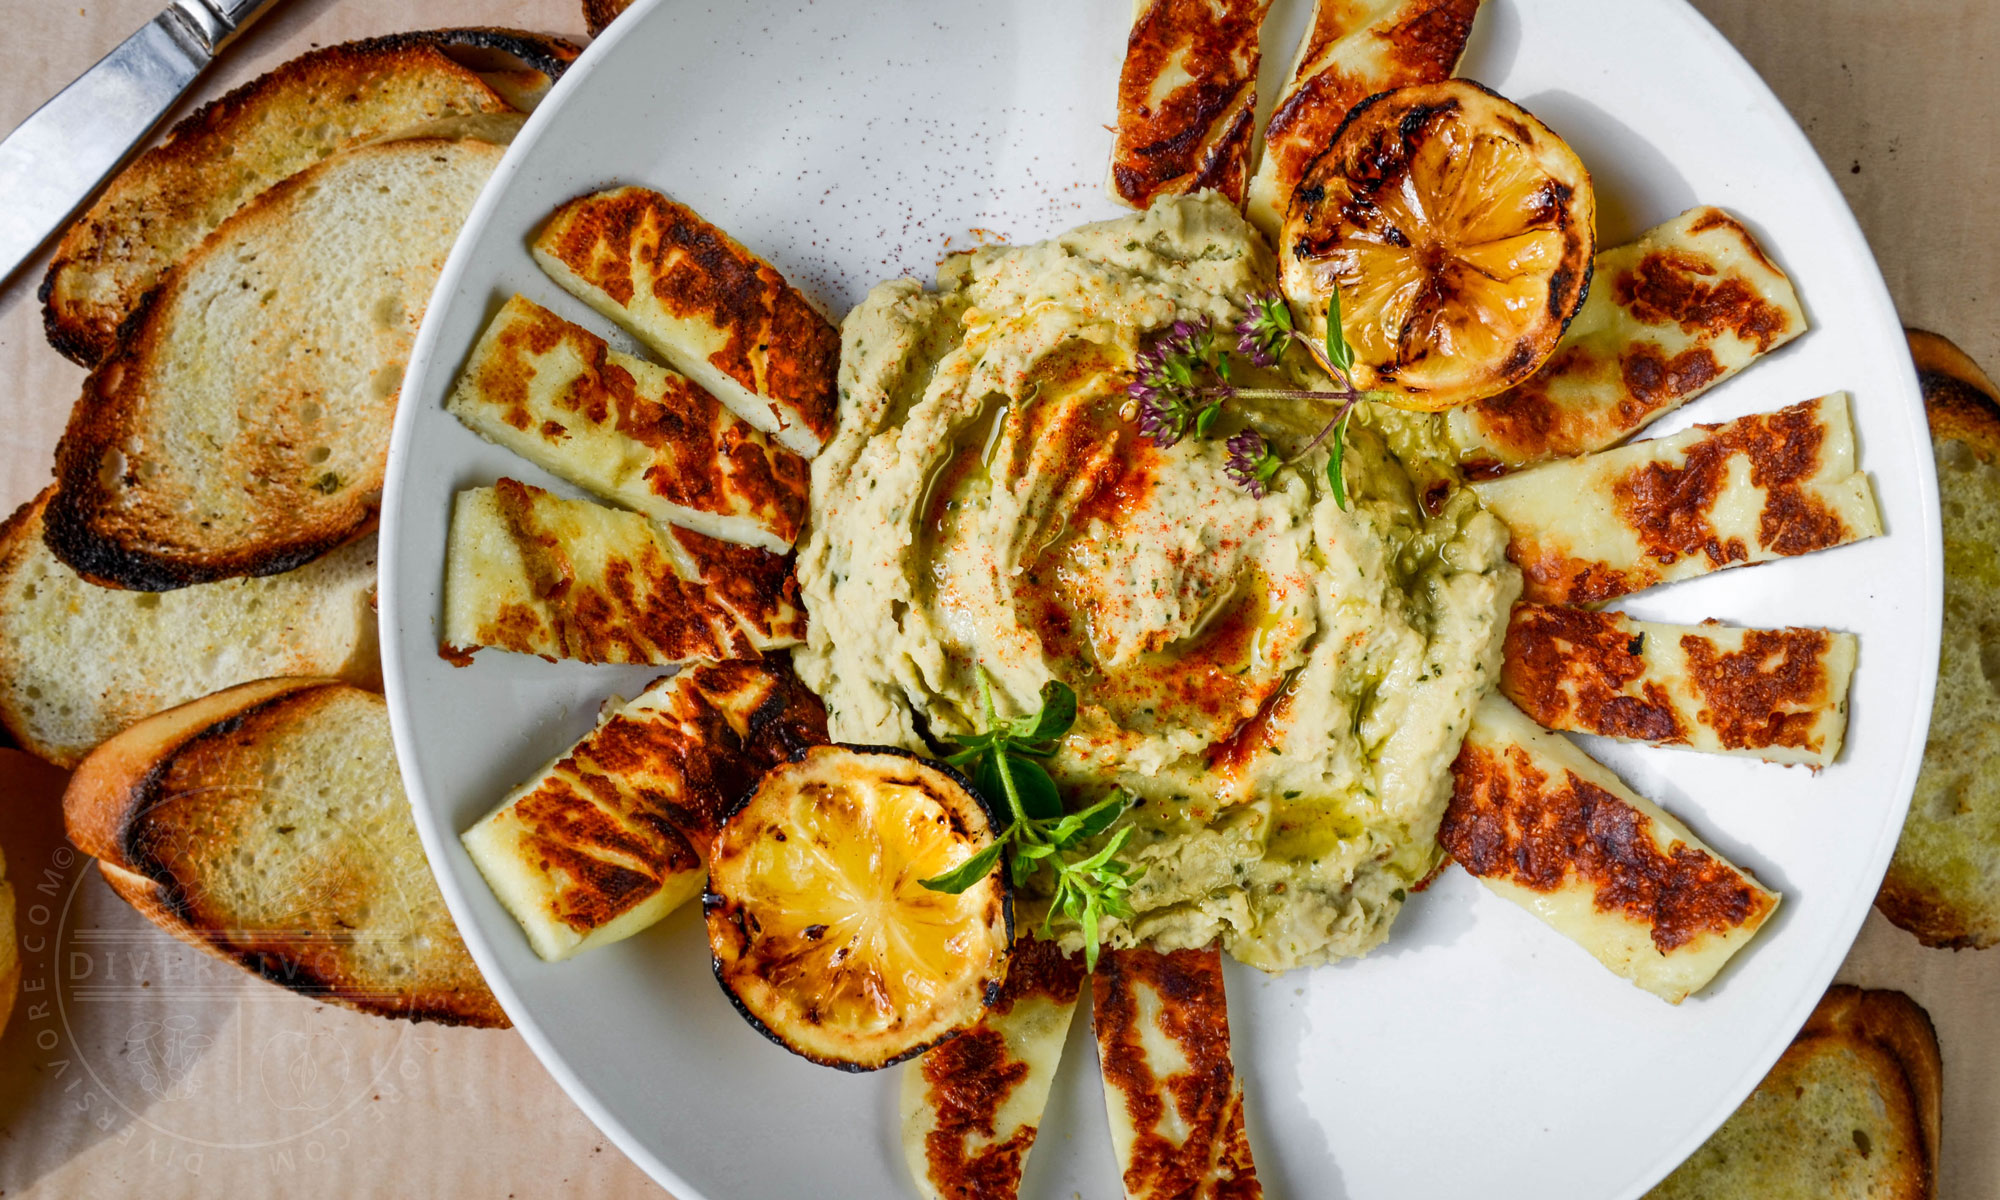 Grilled Halloumi with basil-cannellini hummus, served with grilled lemons and toasted baguette